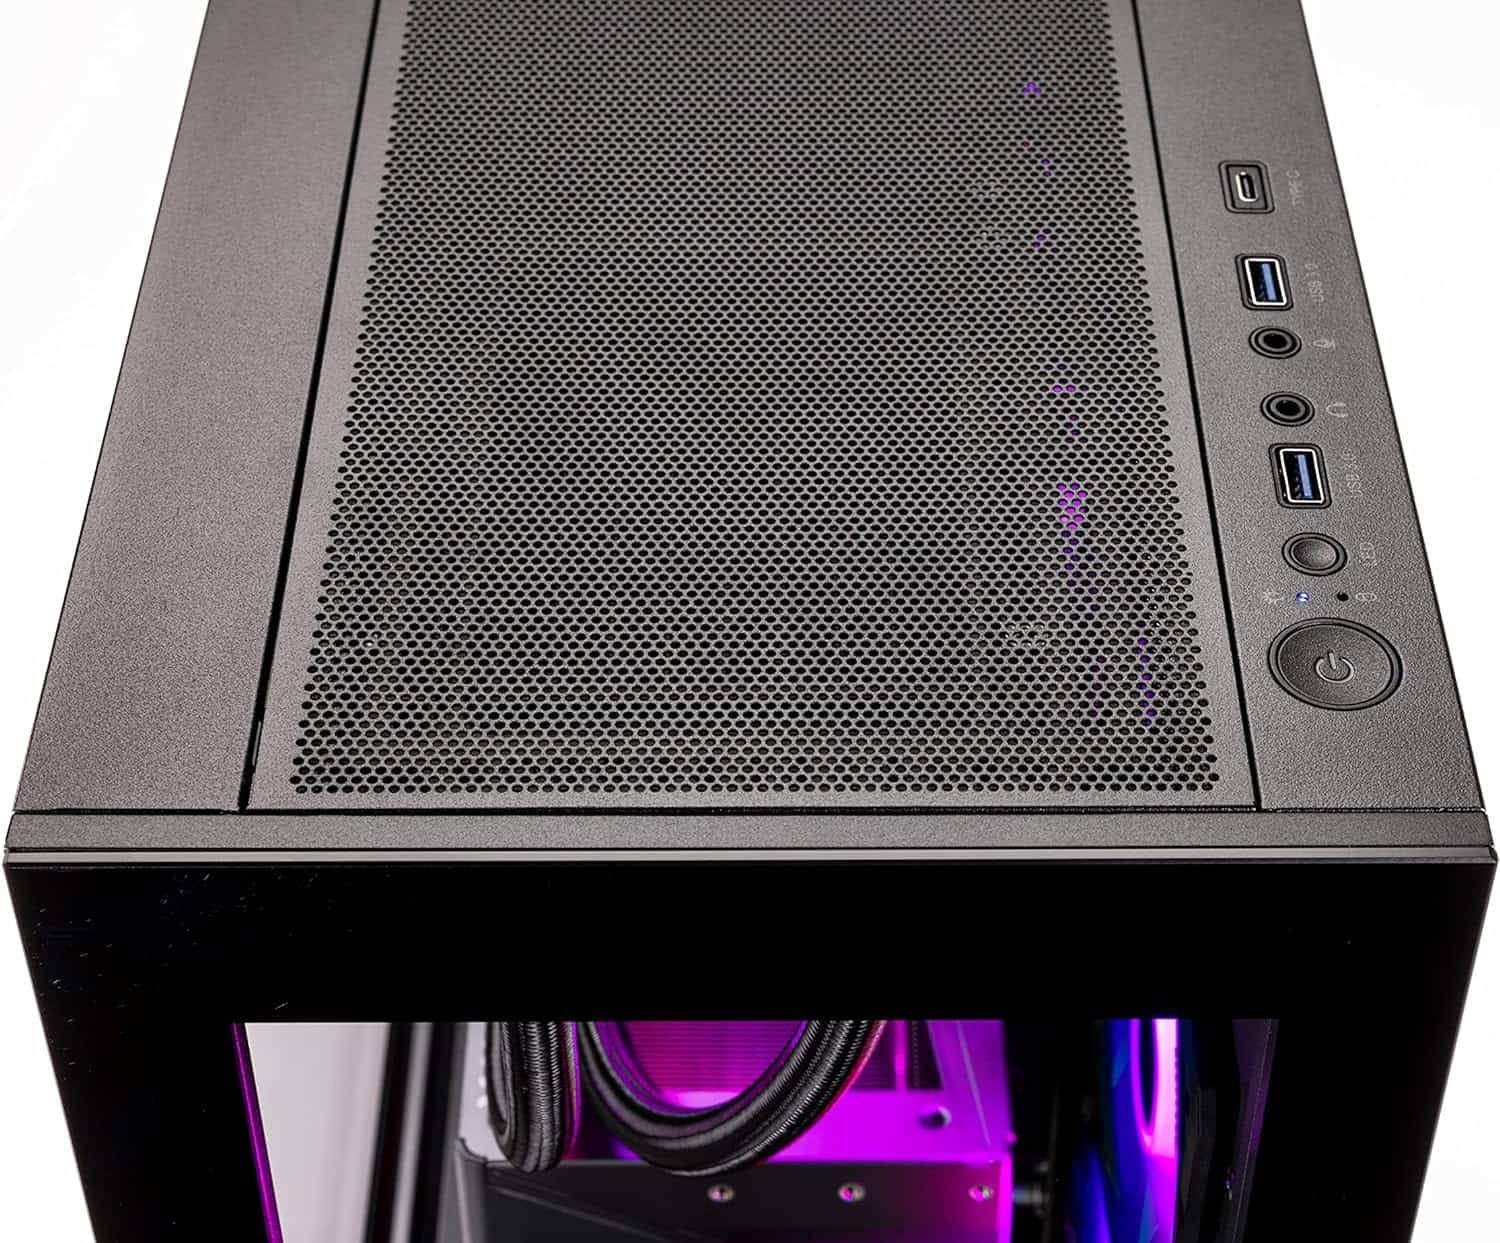 Black Skytech Gaming PC tower with mesh top and purple illuminated interior.